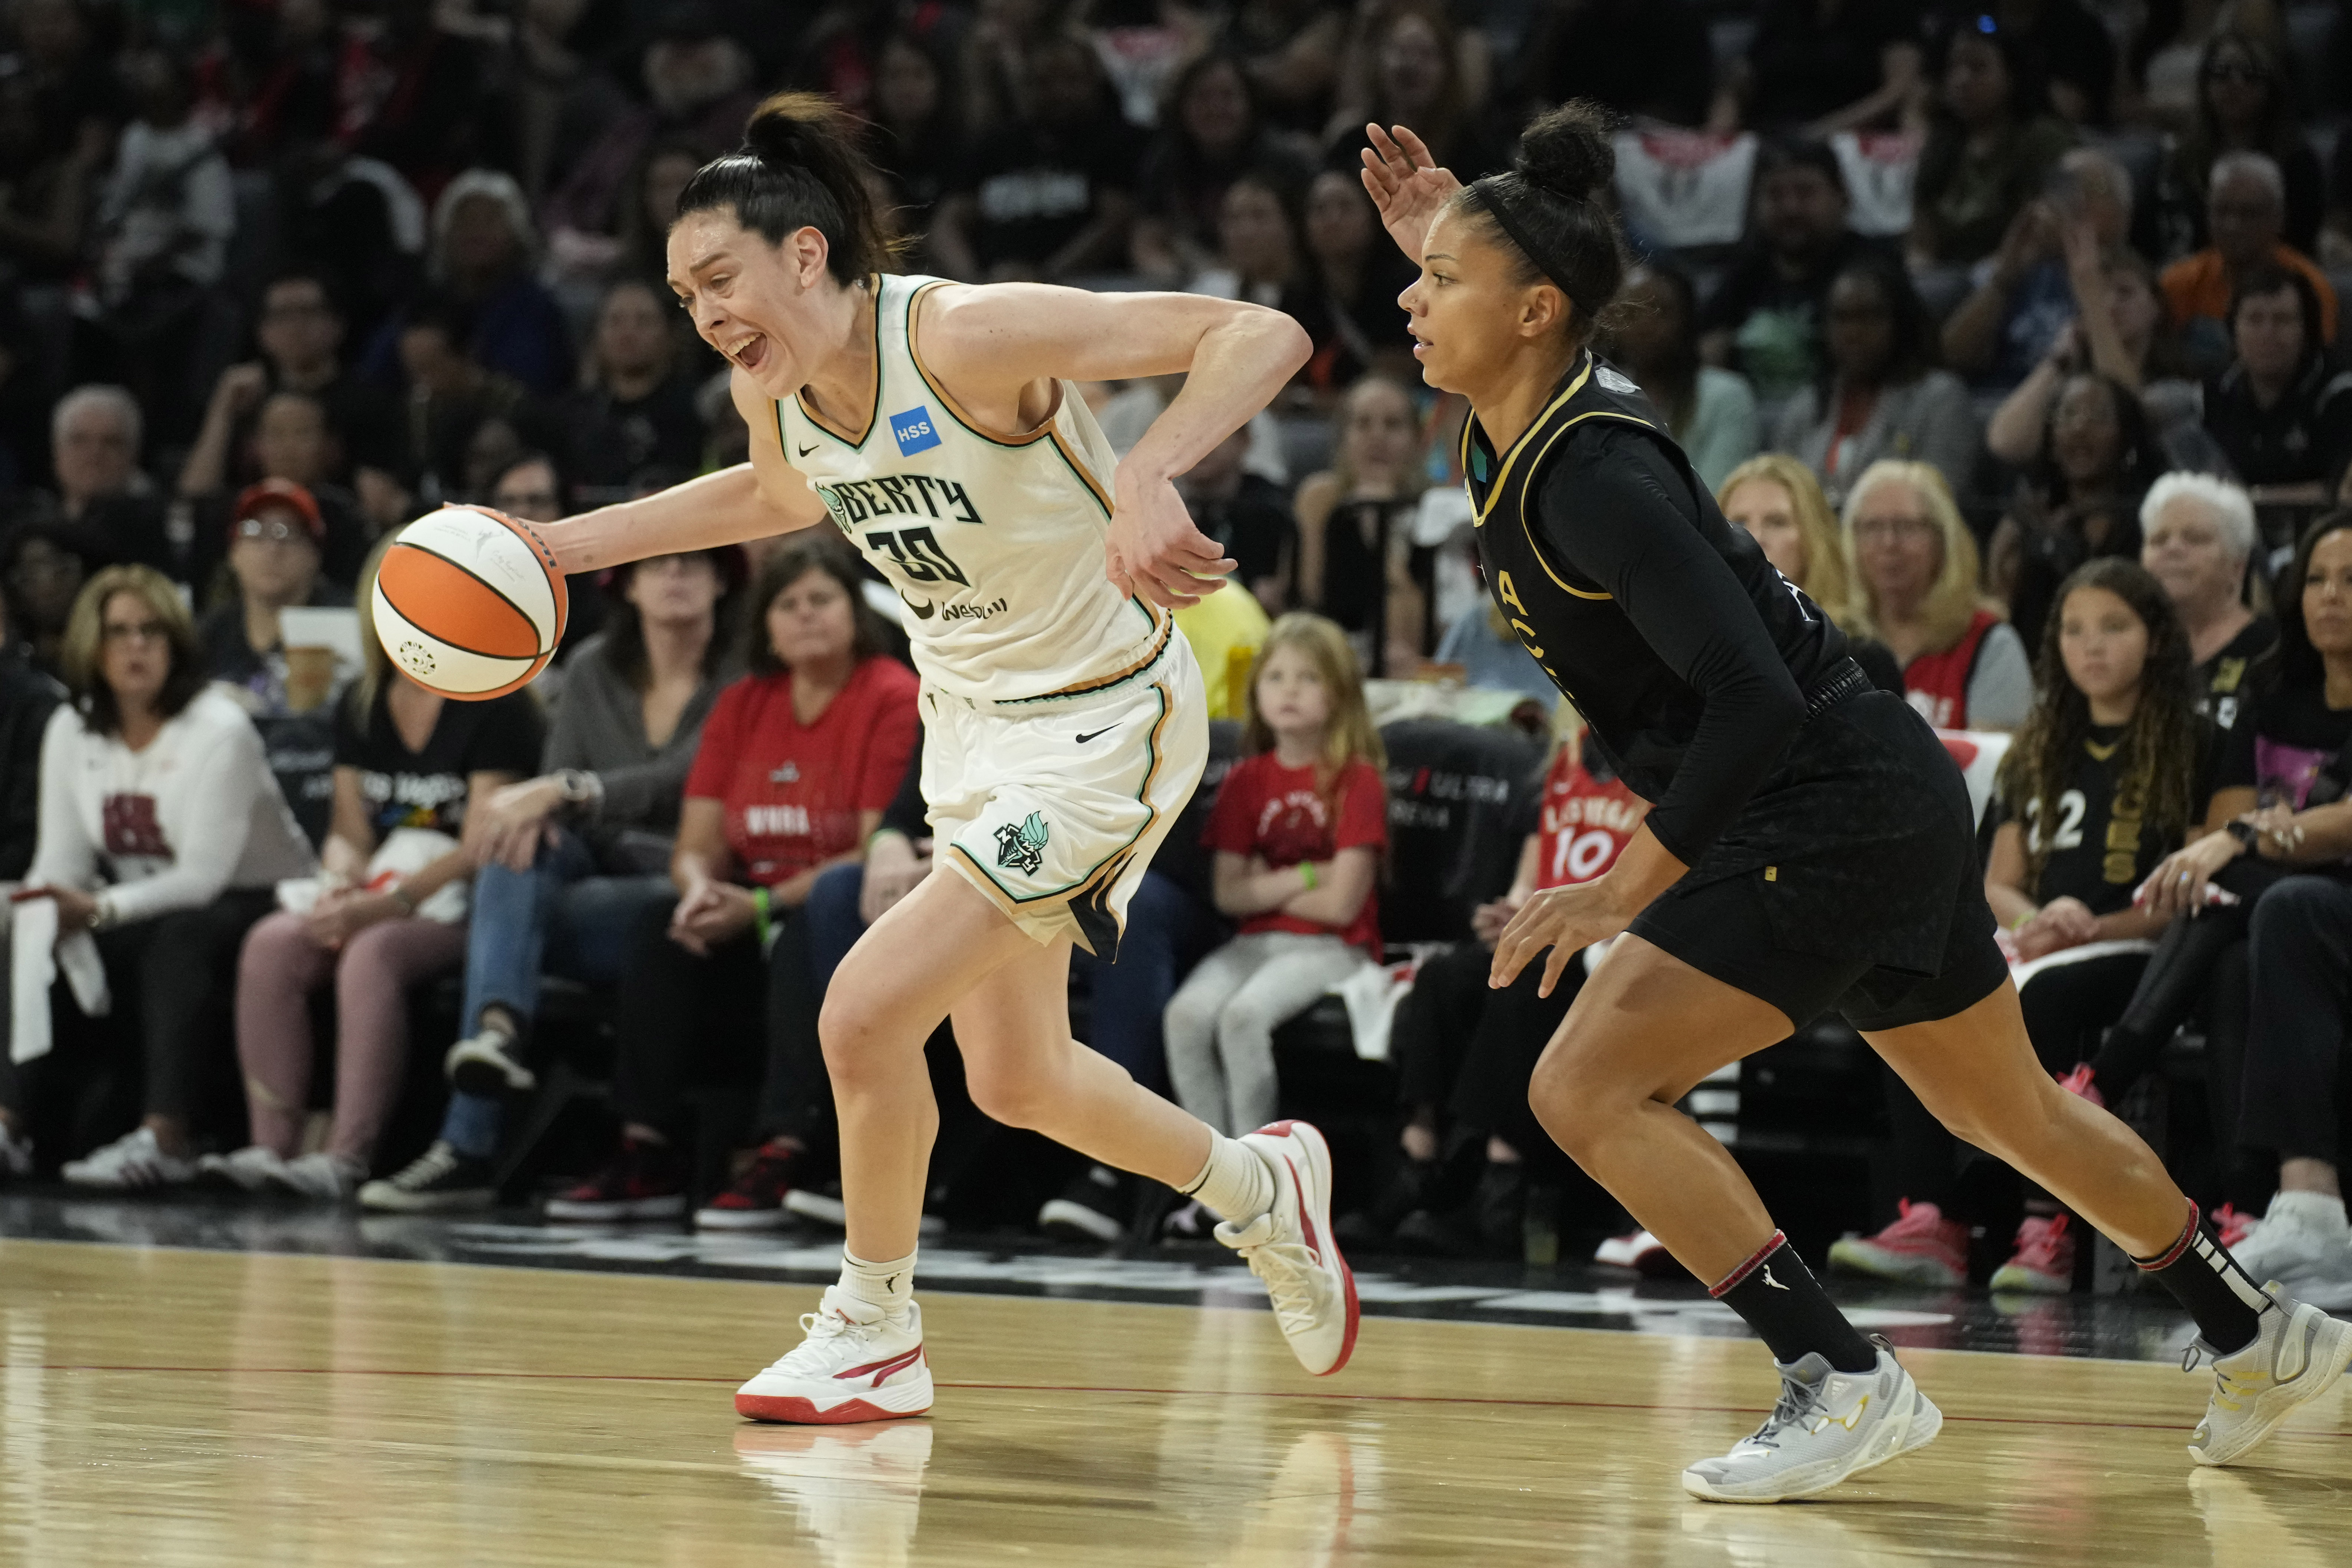 Las Vegas Aces win back-to-back WNBA championships in nail-biter